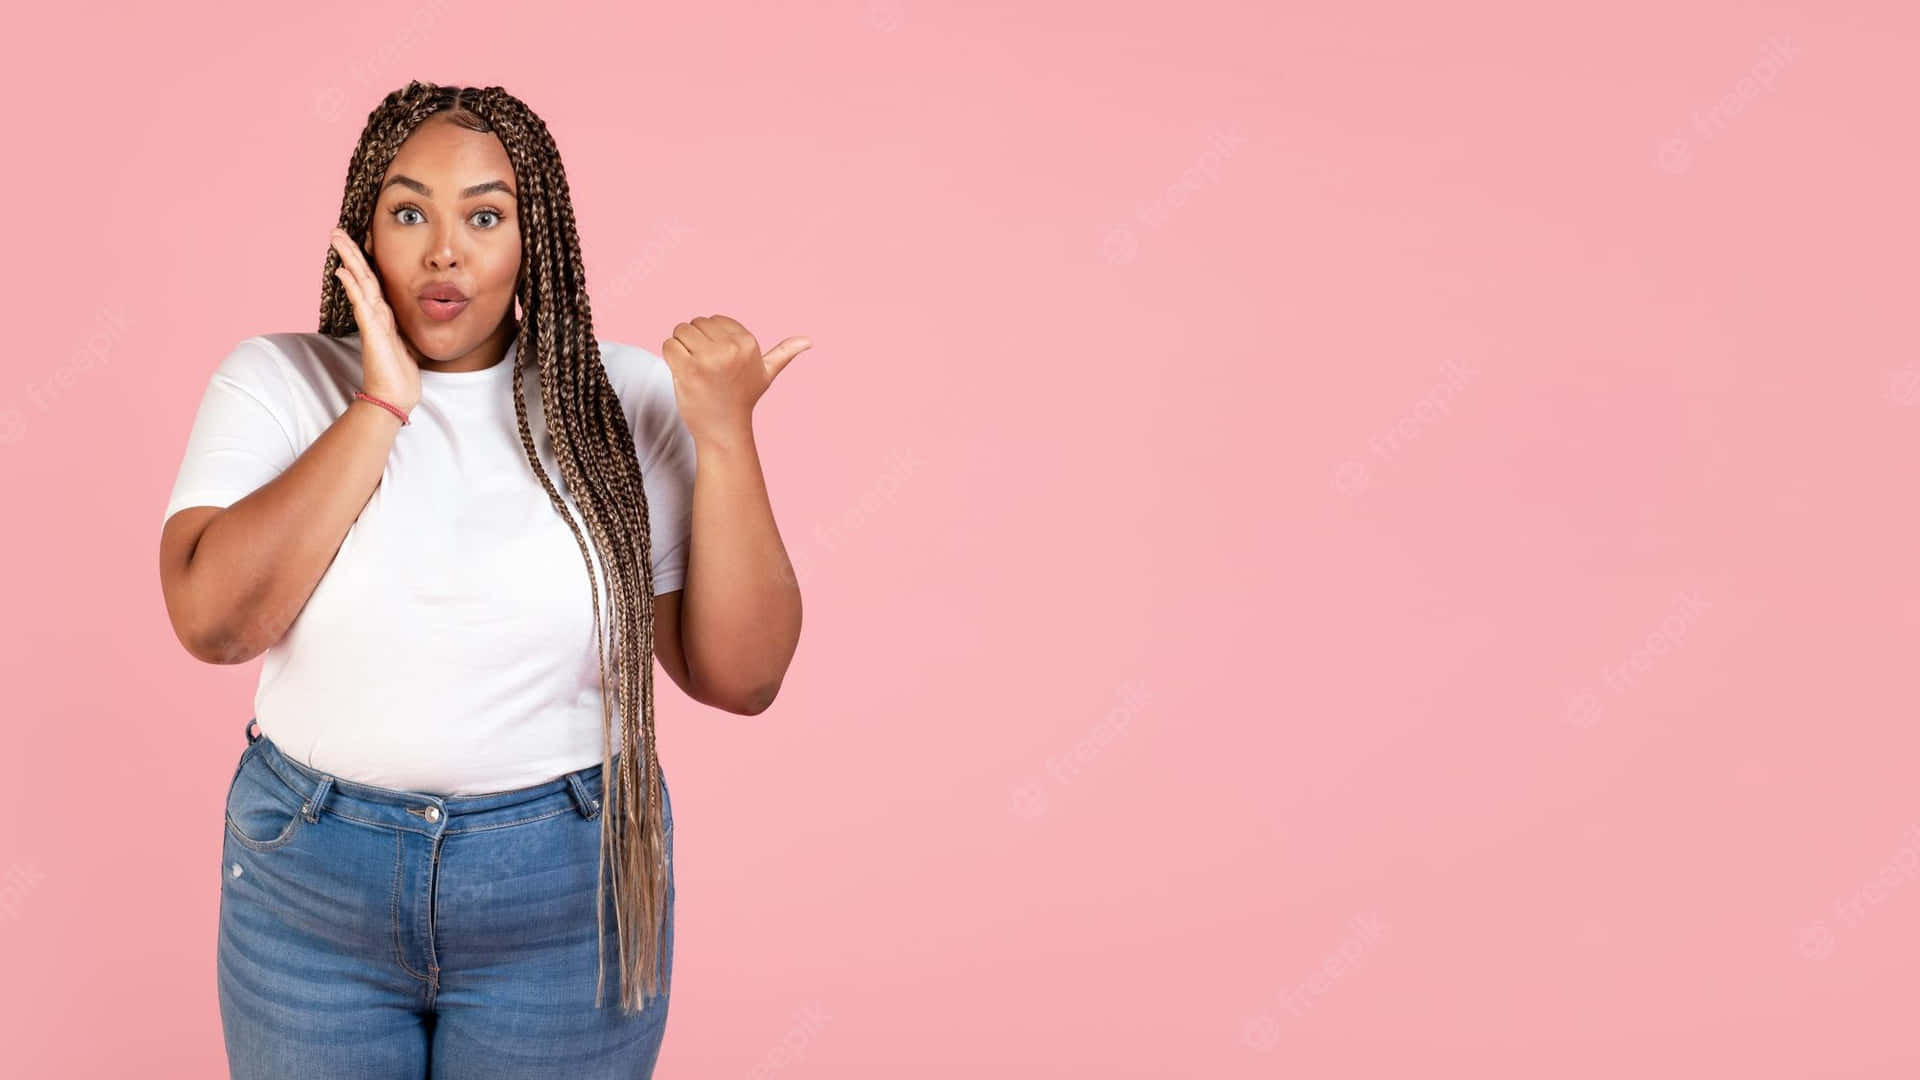 Curvy Woman Against Pink Wall Wallpaper